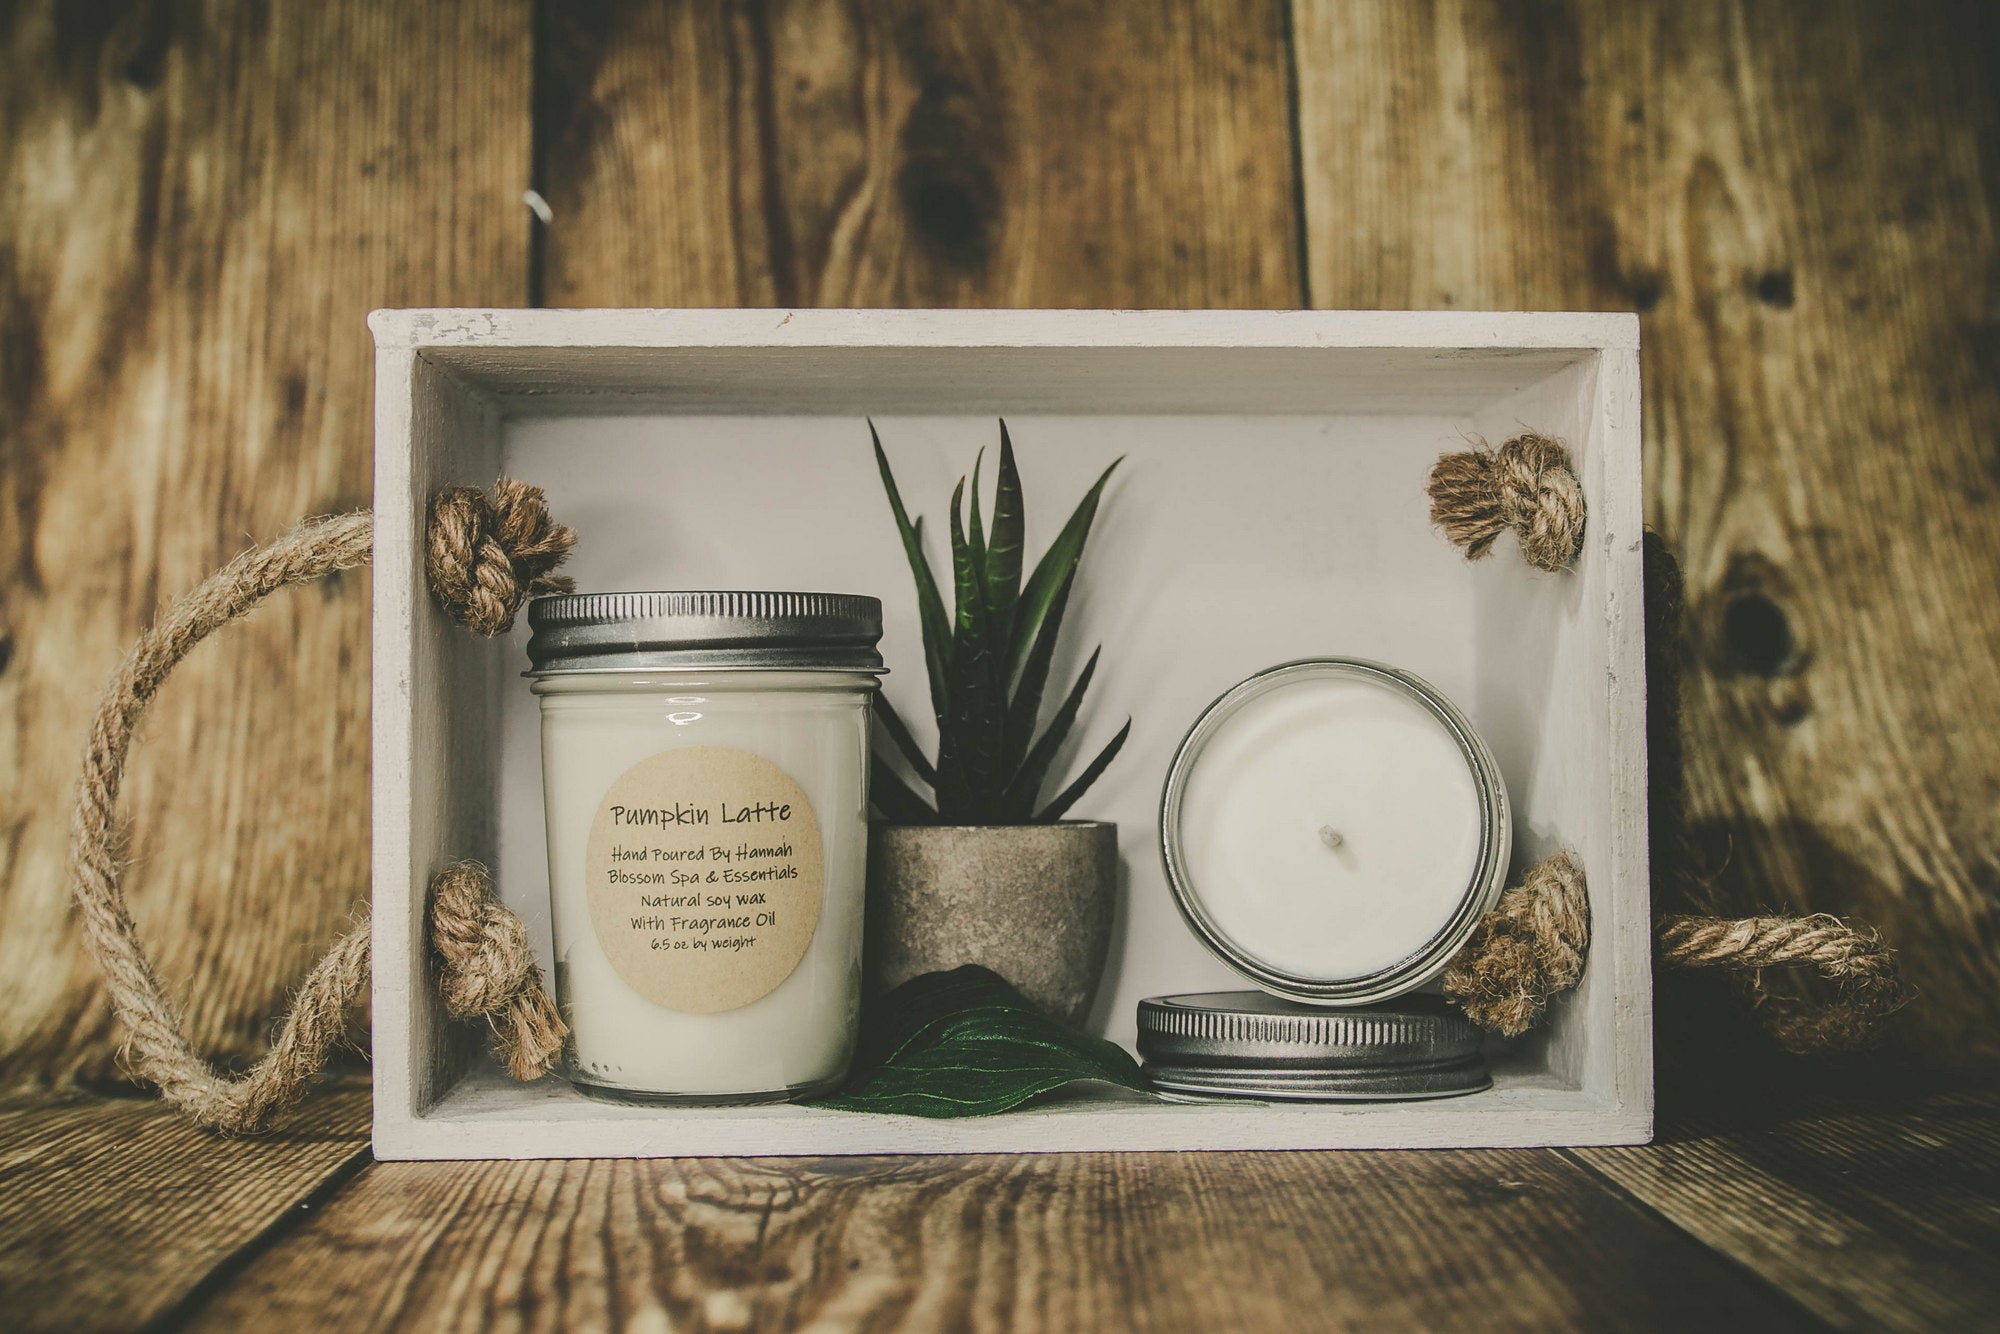 The smell of pumpkin spice, and everything nice is what will come to mind when you smell this Pumpkin Latte candle.  Made in the USA with 100% all natural soy wax for a clean, eco friendly burn. We use eco friendly wicks for a steady flame.  Notes: Cinnamon, Cardamom, and Nutmeg.  Contact us for local delivery and pickup.  jar candles large scented candles soy candles benefits cheap soy candles 100% soy candles soy candles for sale soy candles safe best soy candles soy wax candles Candles near me